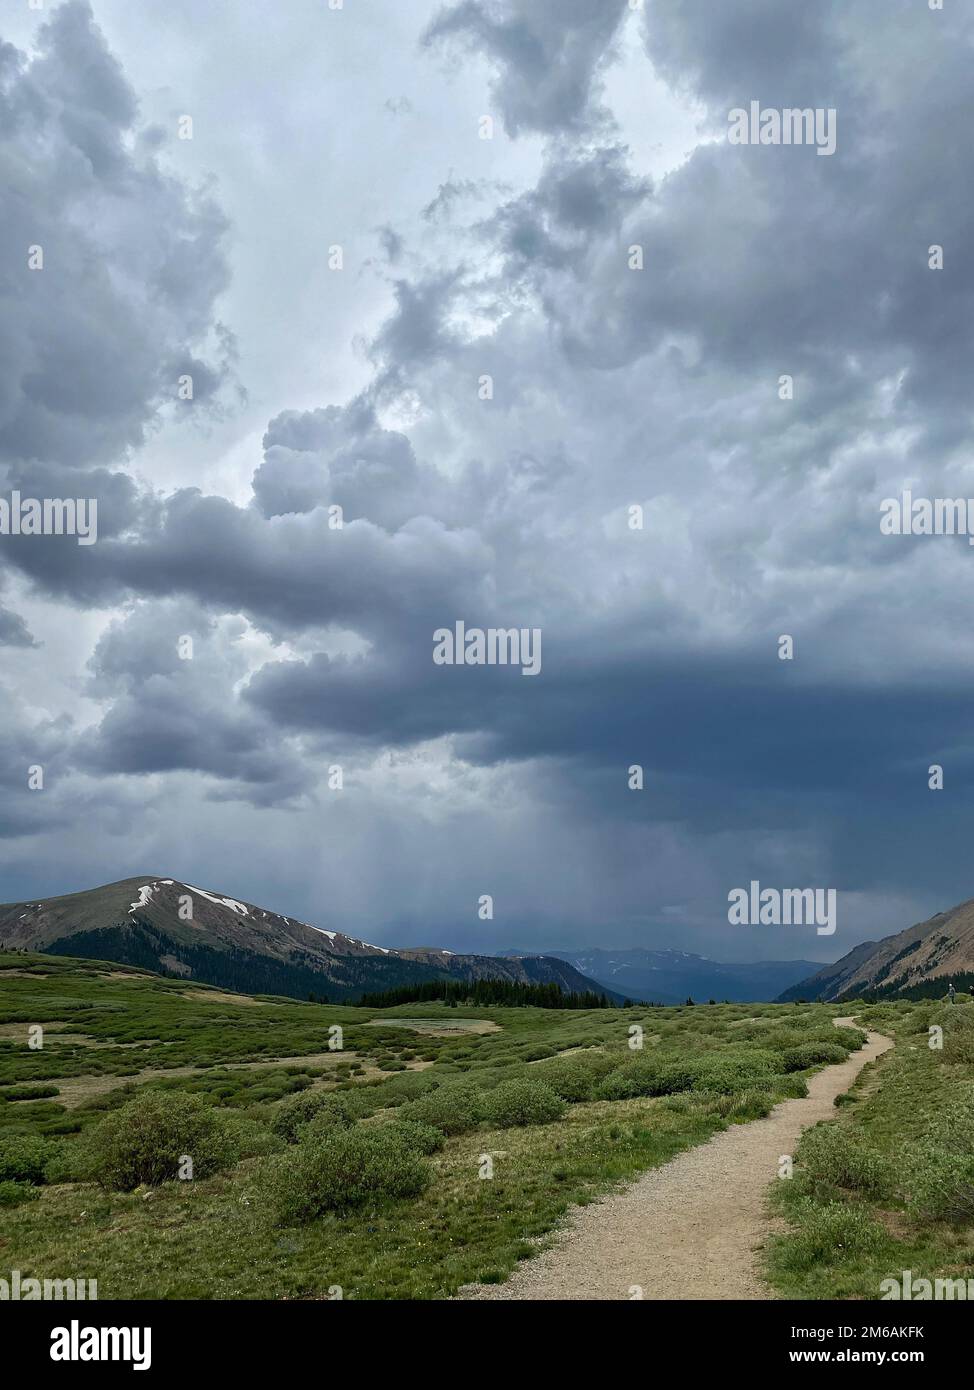 Stormy skies over hiking trail. Stock Photo